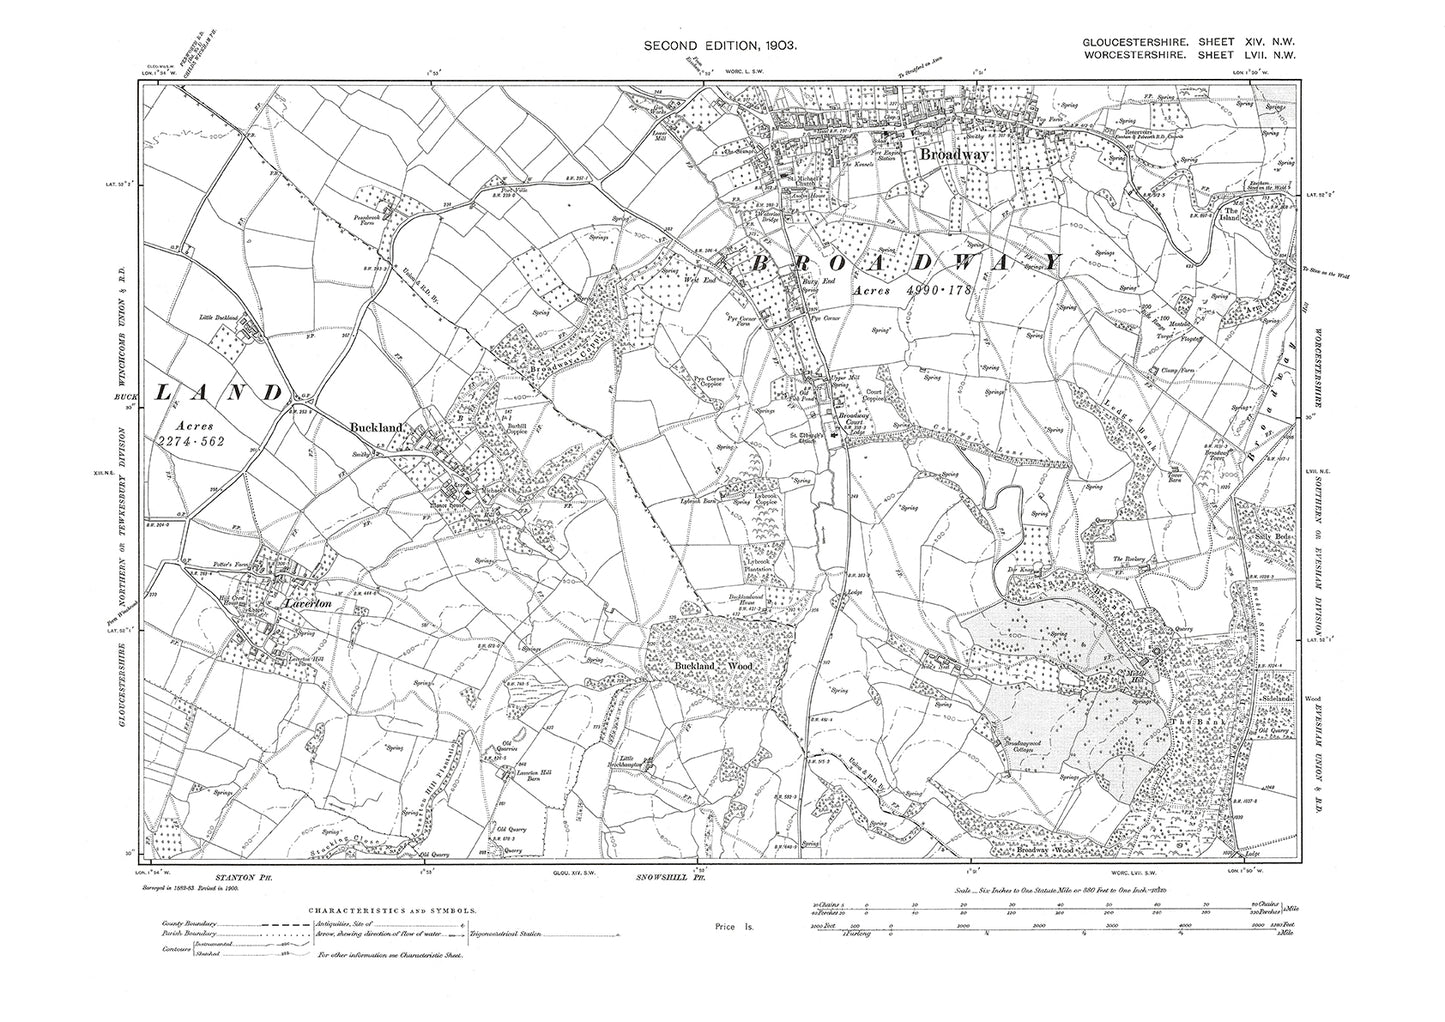 Old OS map dated 1903, showing Buckland, Laverton in Gloucestershire - 14NW